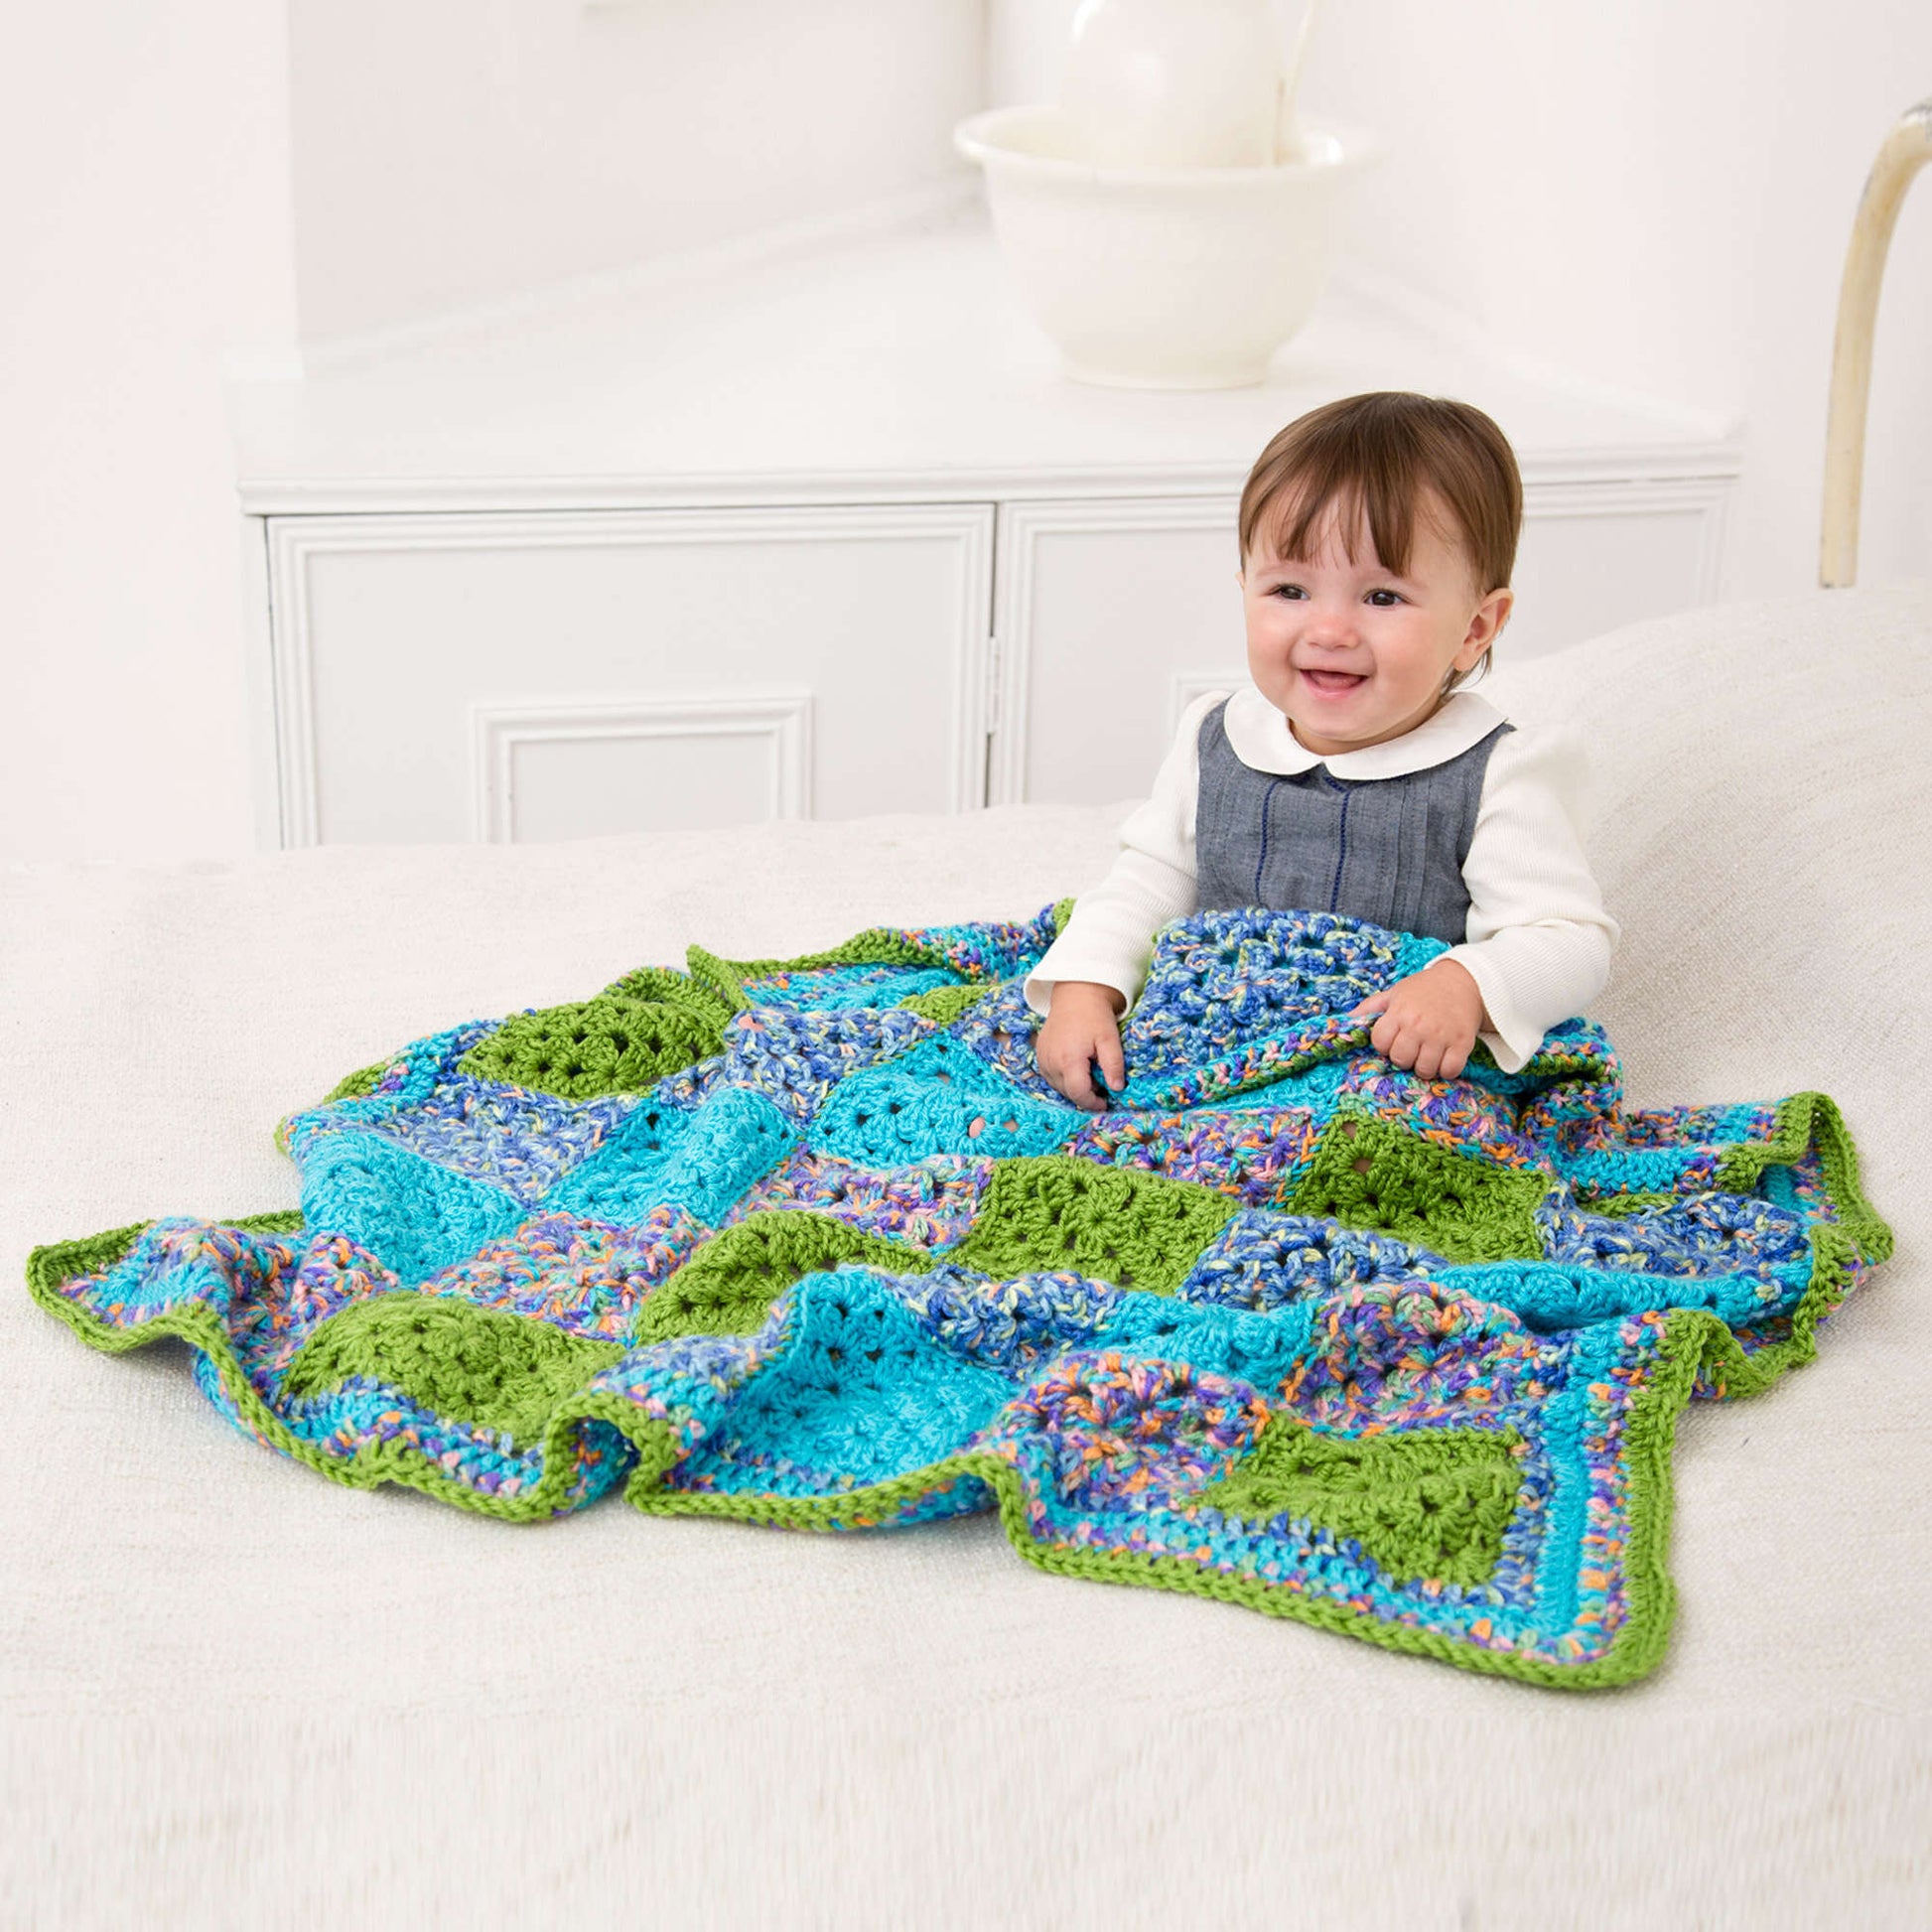 Free Red Heart Many Squares Crochet Baby Blanket Pattern